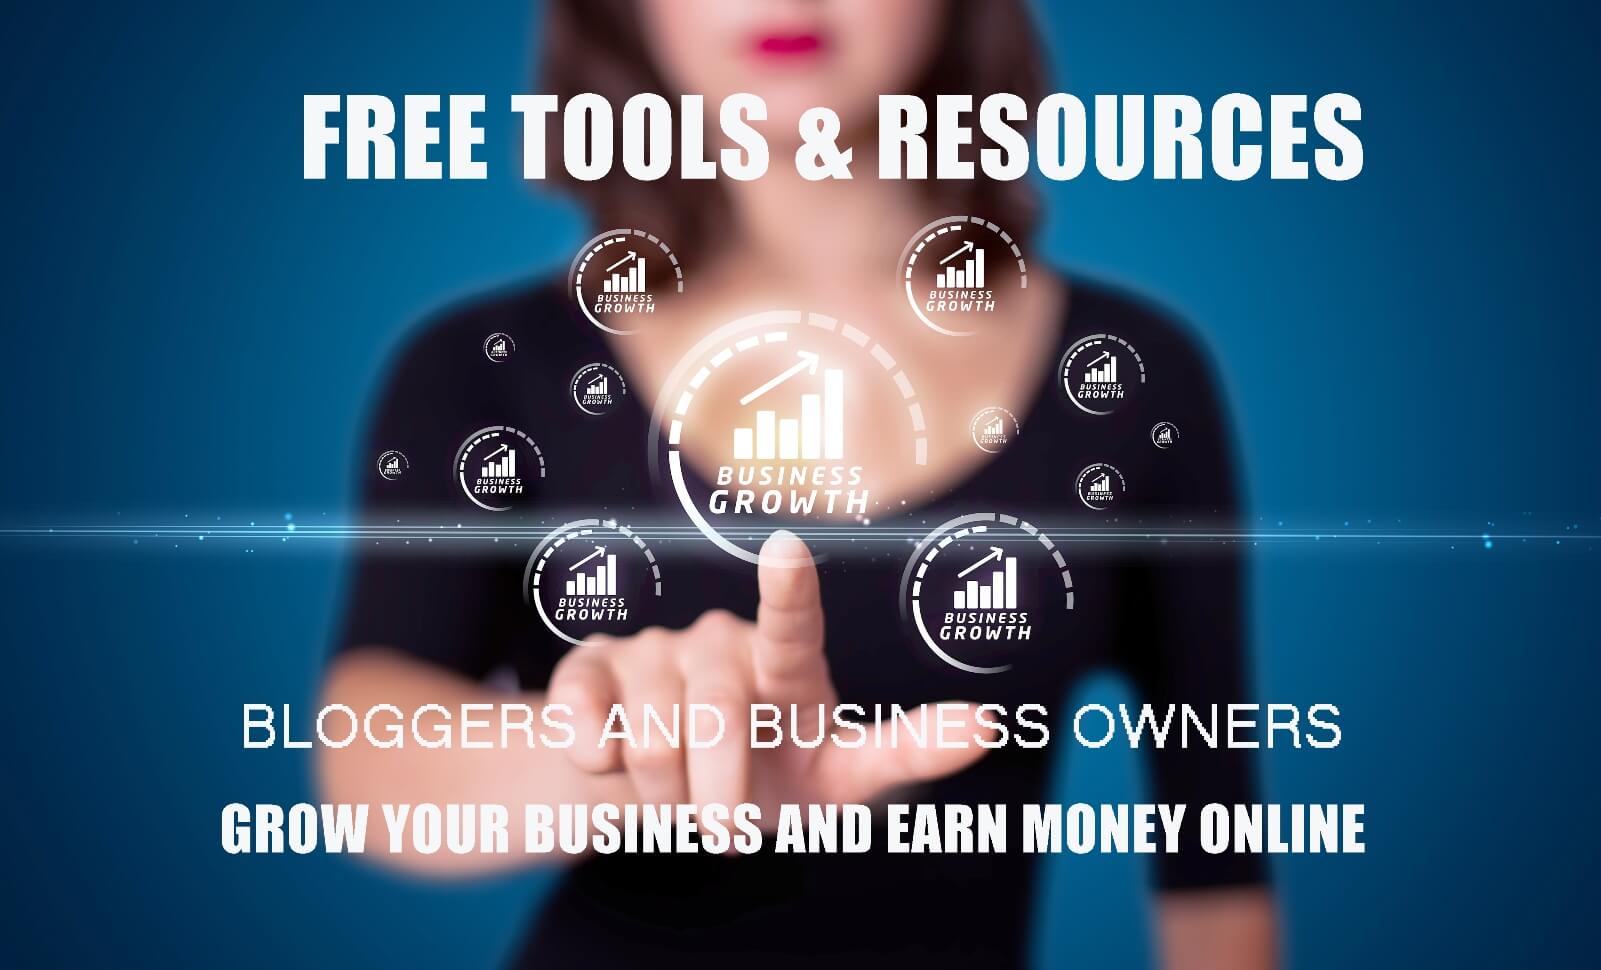 Free tools and resources for bloggers and business owners